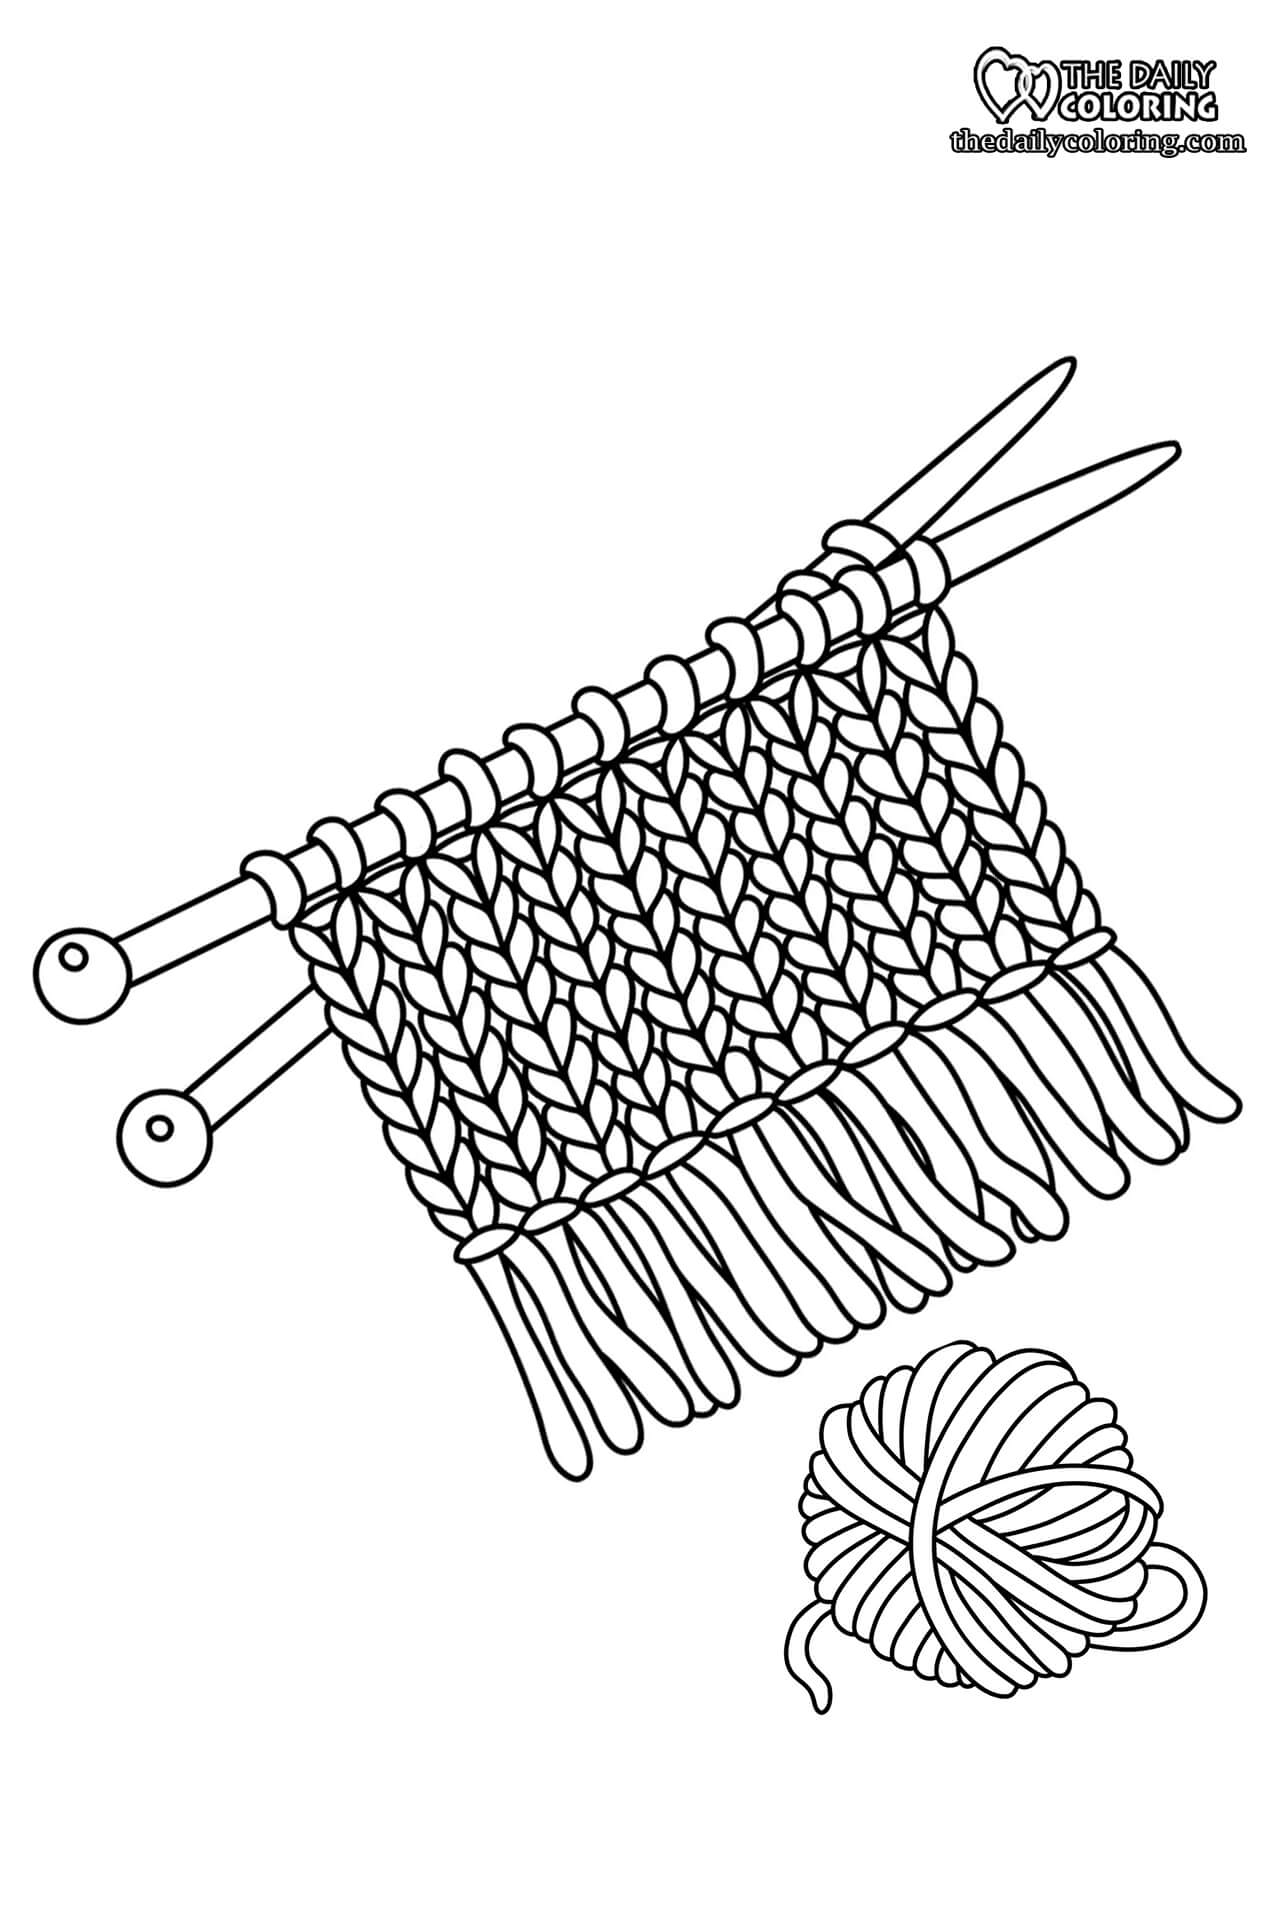 knitting-coloring-page